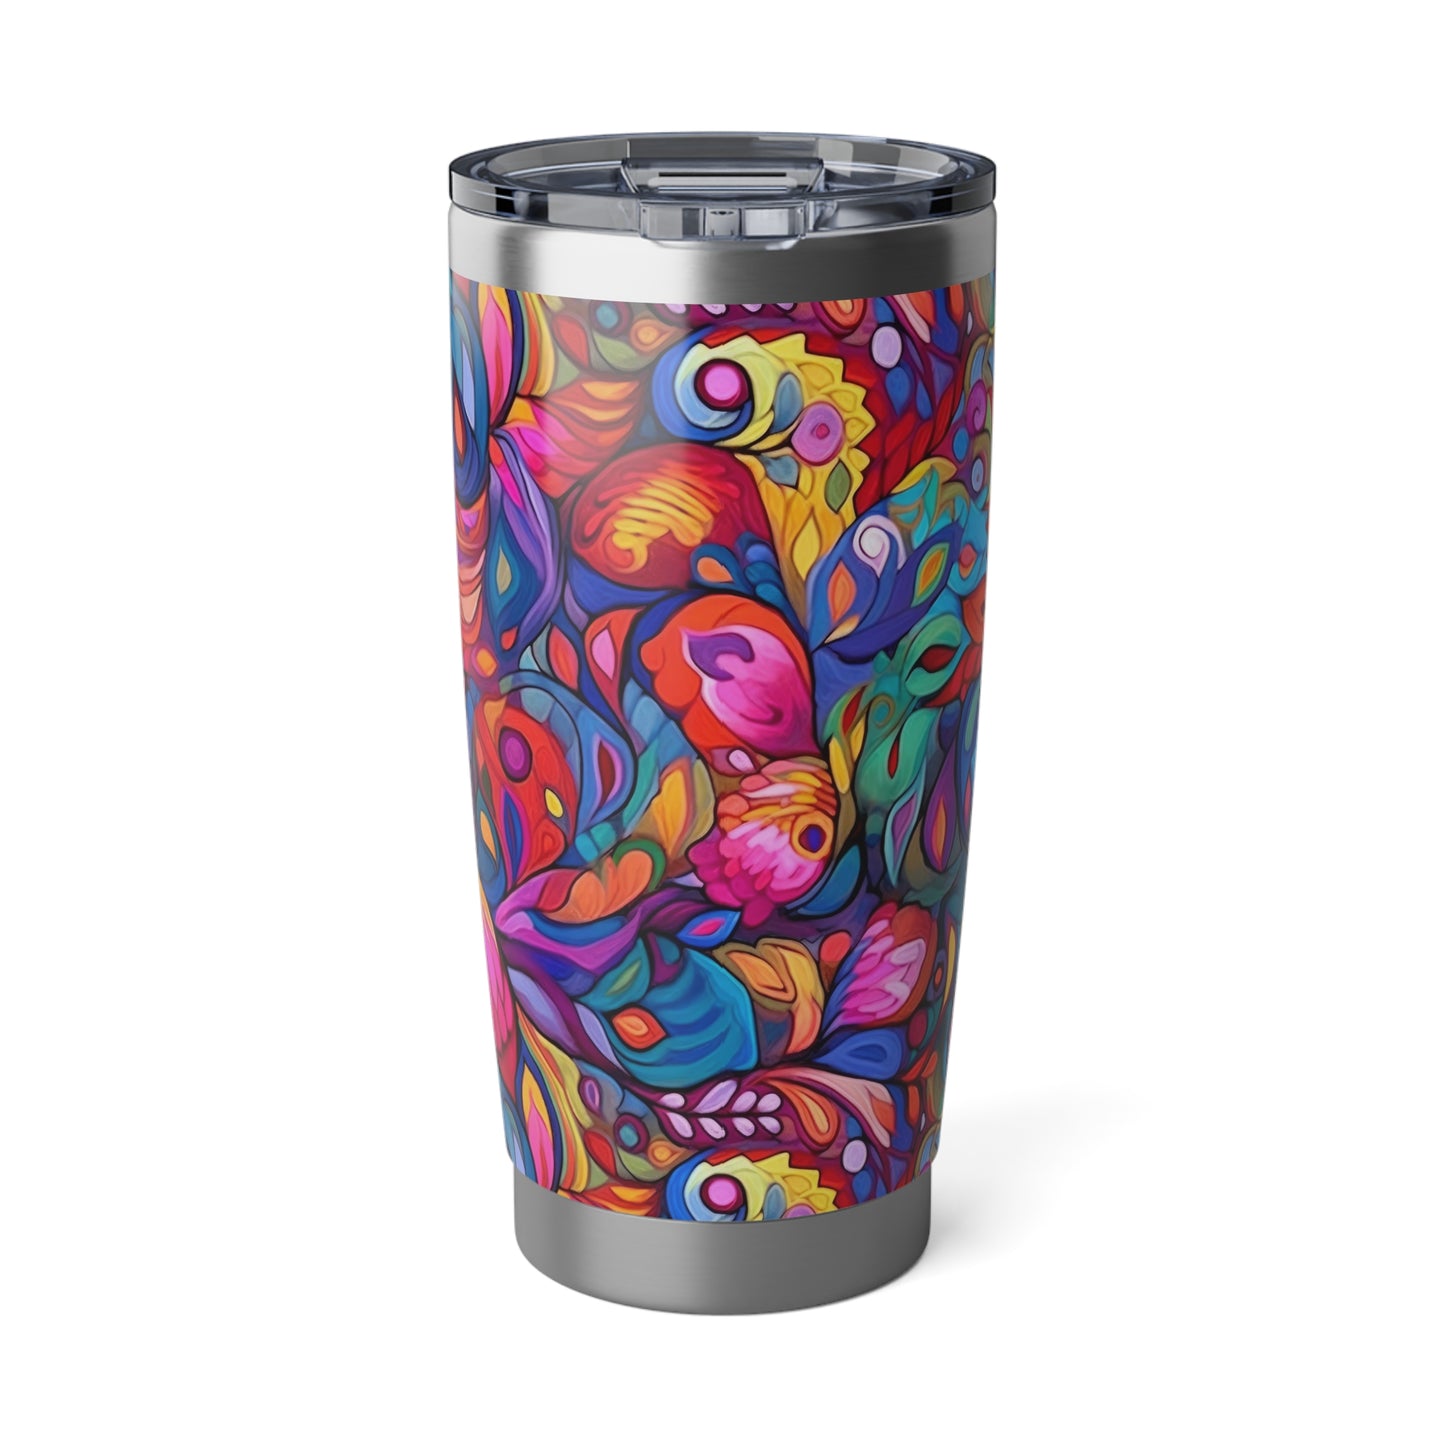 Colorful Joy Elements 1.8 - Vagabond 20oz Tumbler - Stainless Steel - Double Wall